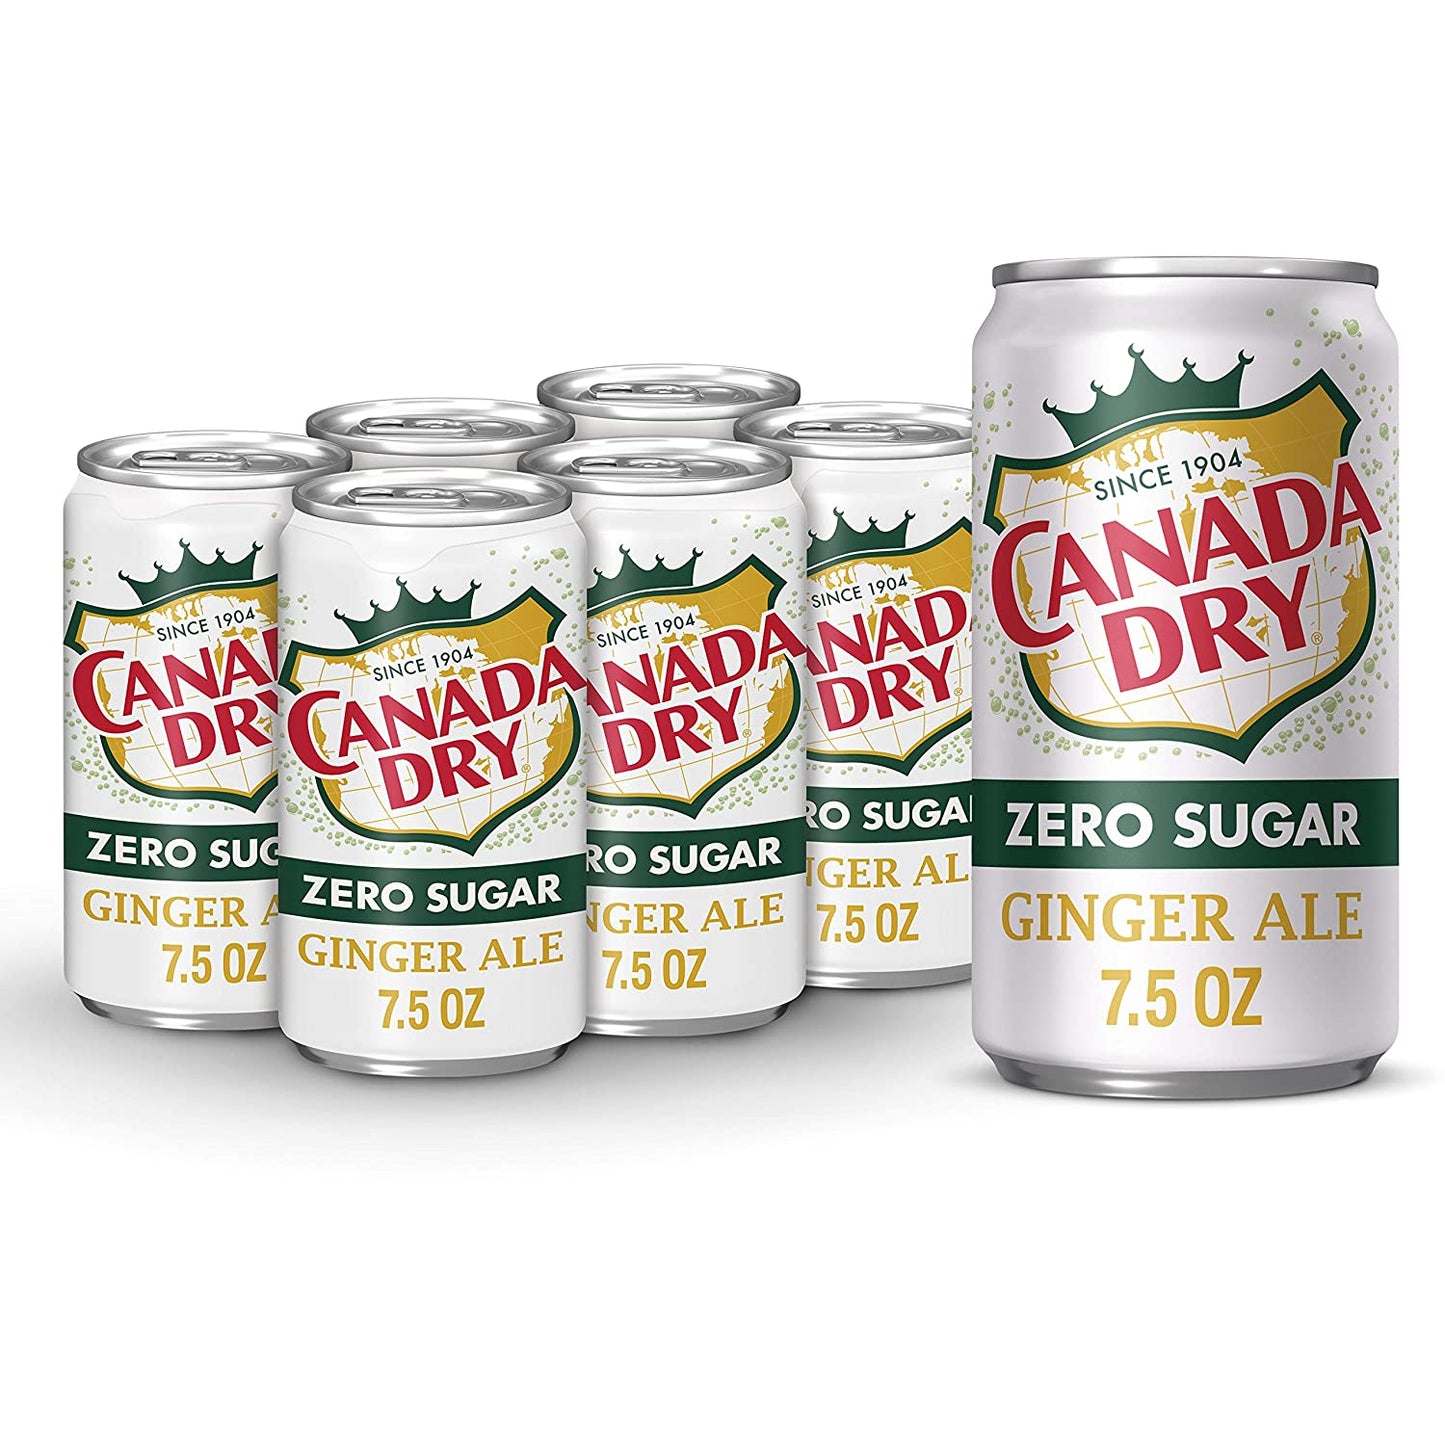 Canada Dry Diet Zero Sugar Ginger Ale Mini Cans 7.5oz 12 Pack or 24 Pack - drinkdrop.net